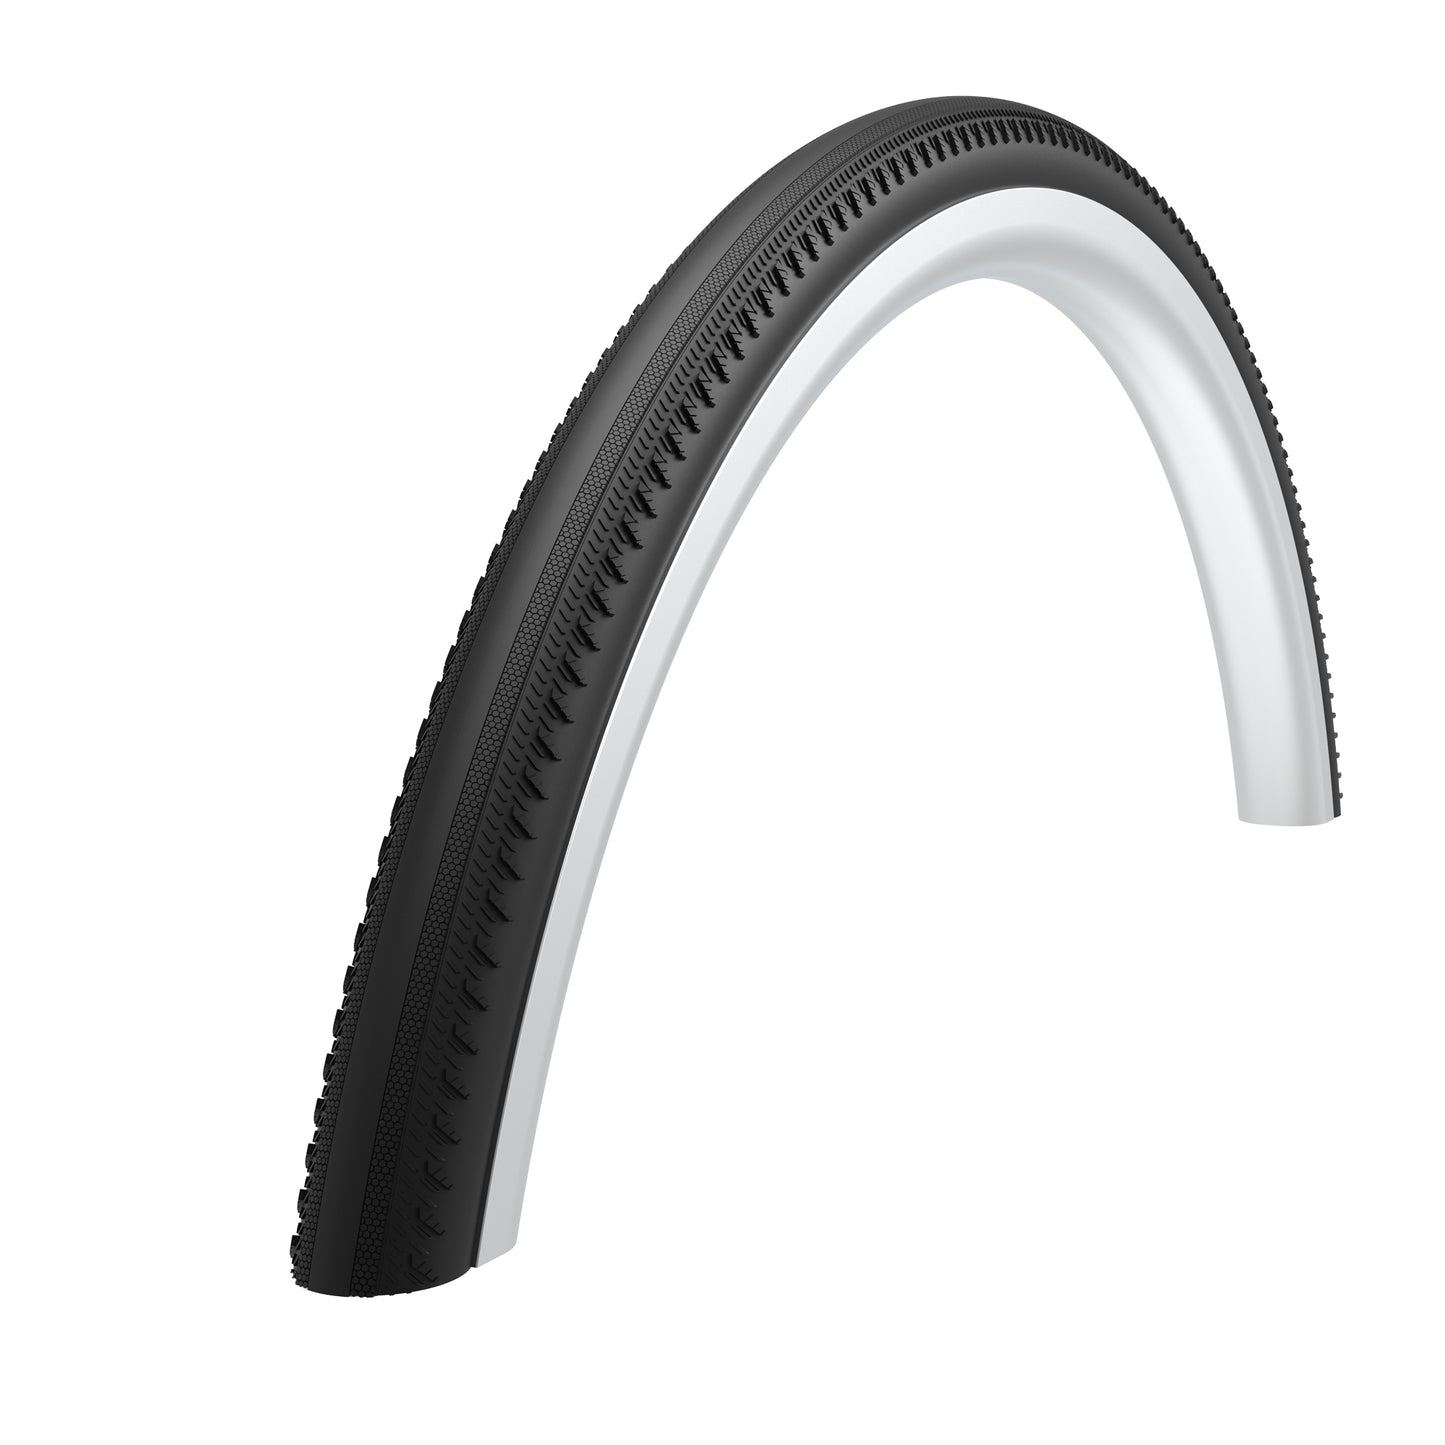 Tyre All Road Gravel 700x32c Black Puncture Shield